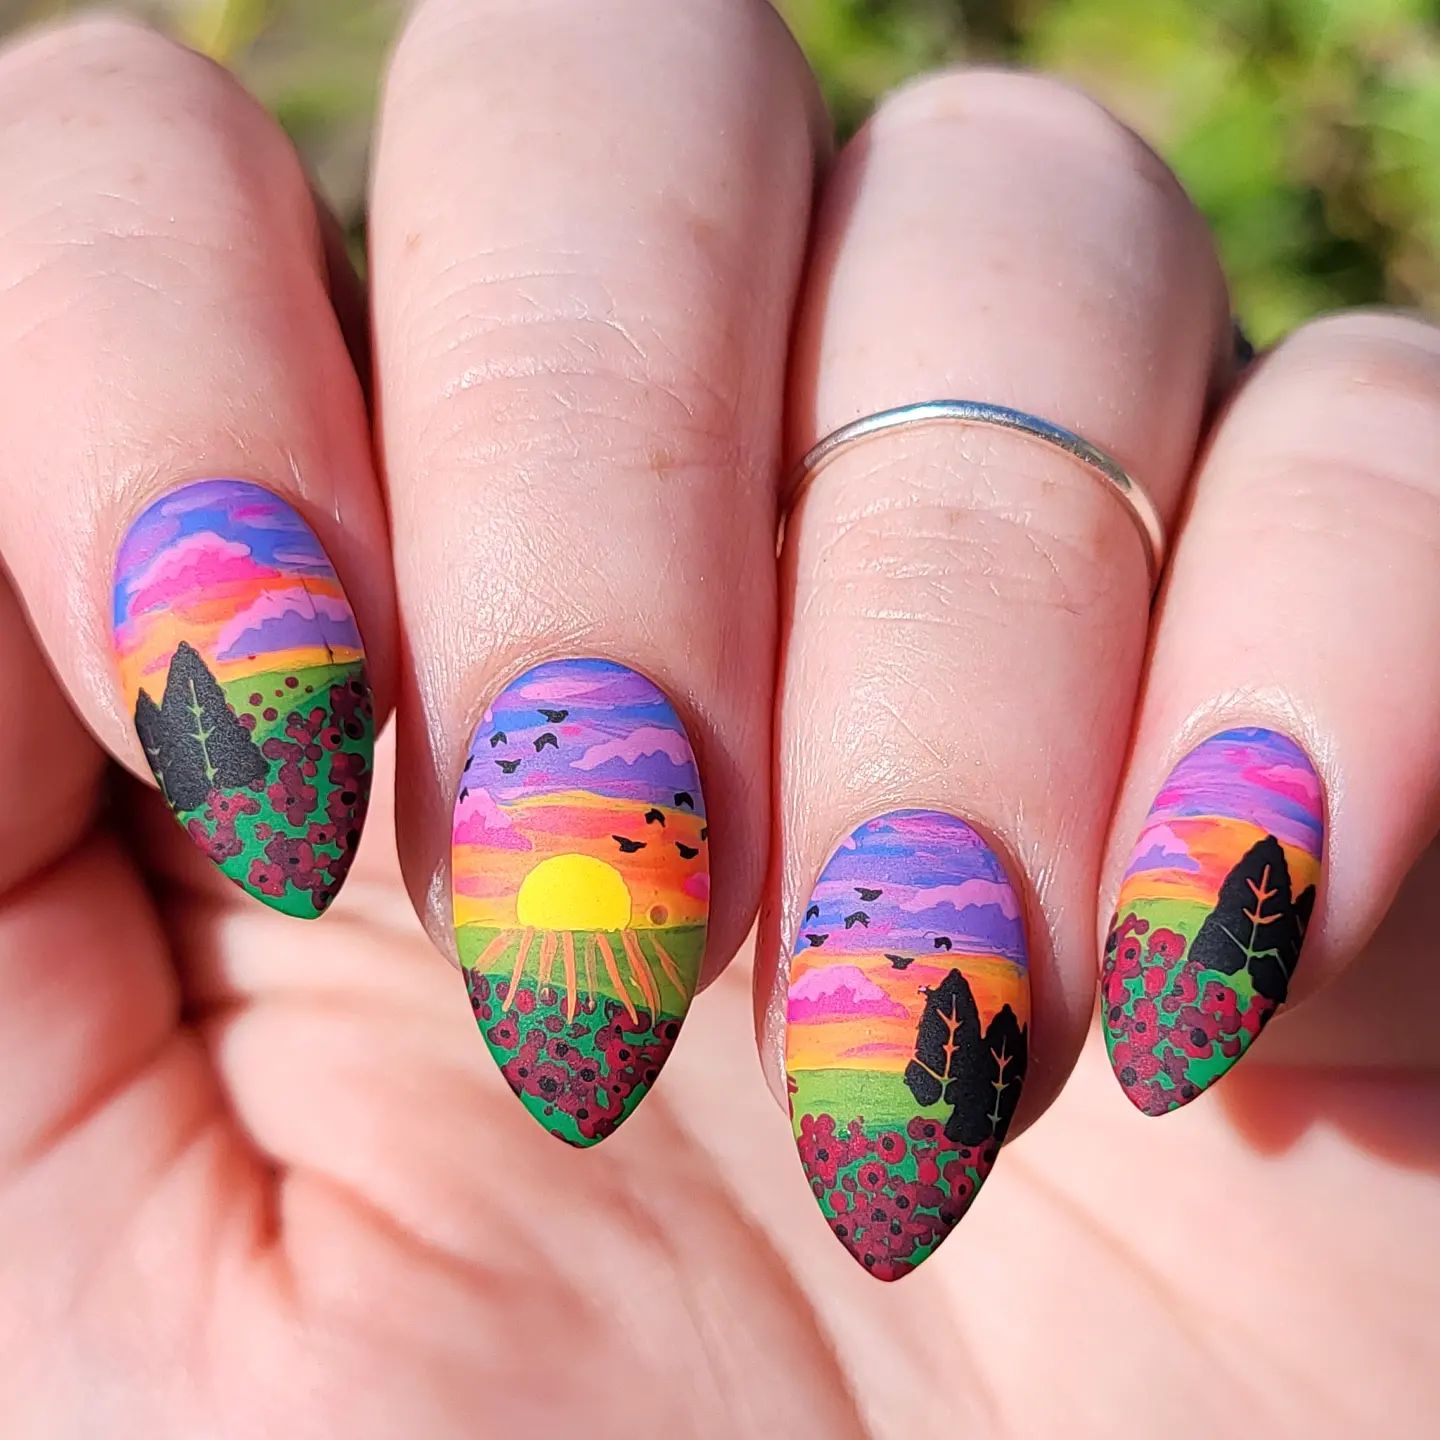 At the end of each day, sunsets remind us to rest and watch the beauty of the sky. Being one of the most beautiful views, sunsets inspire many designs just like nail designs. Just look at the harmony of various colors above. This matte look is definitely an art piece.